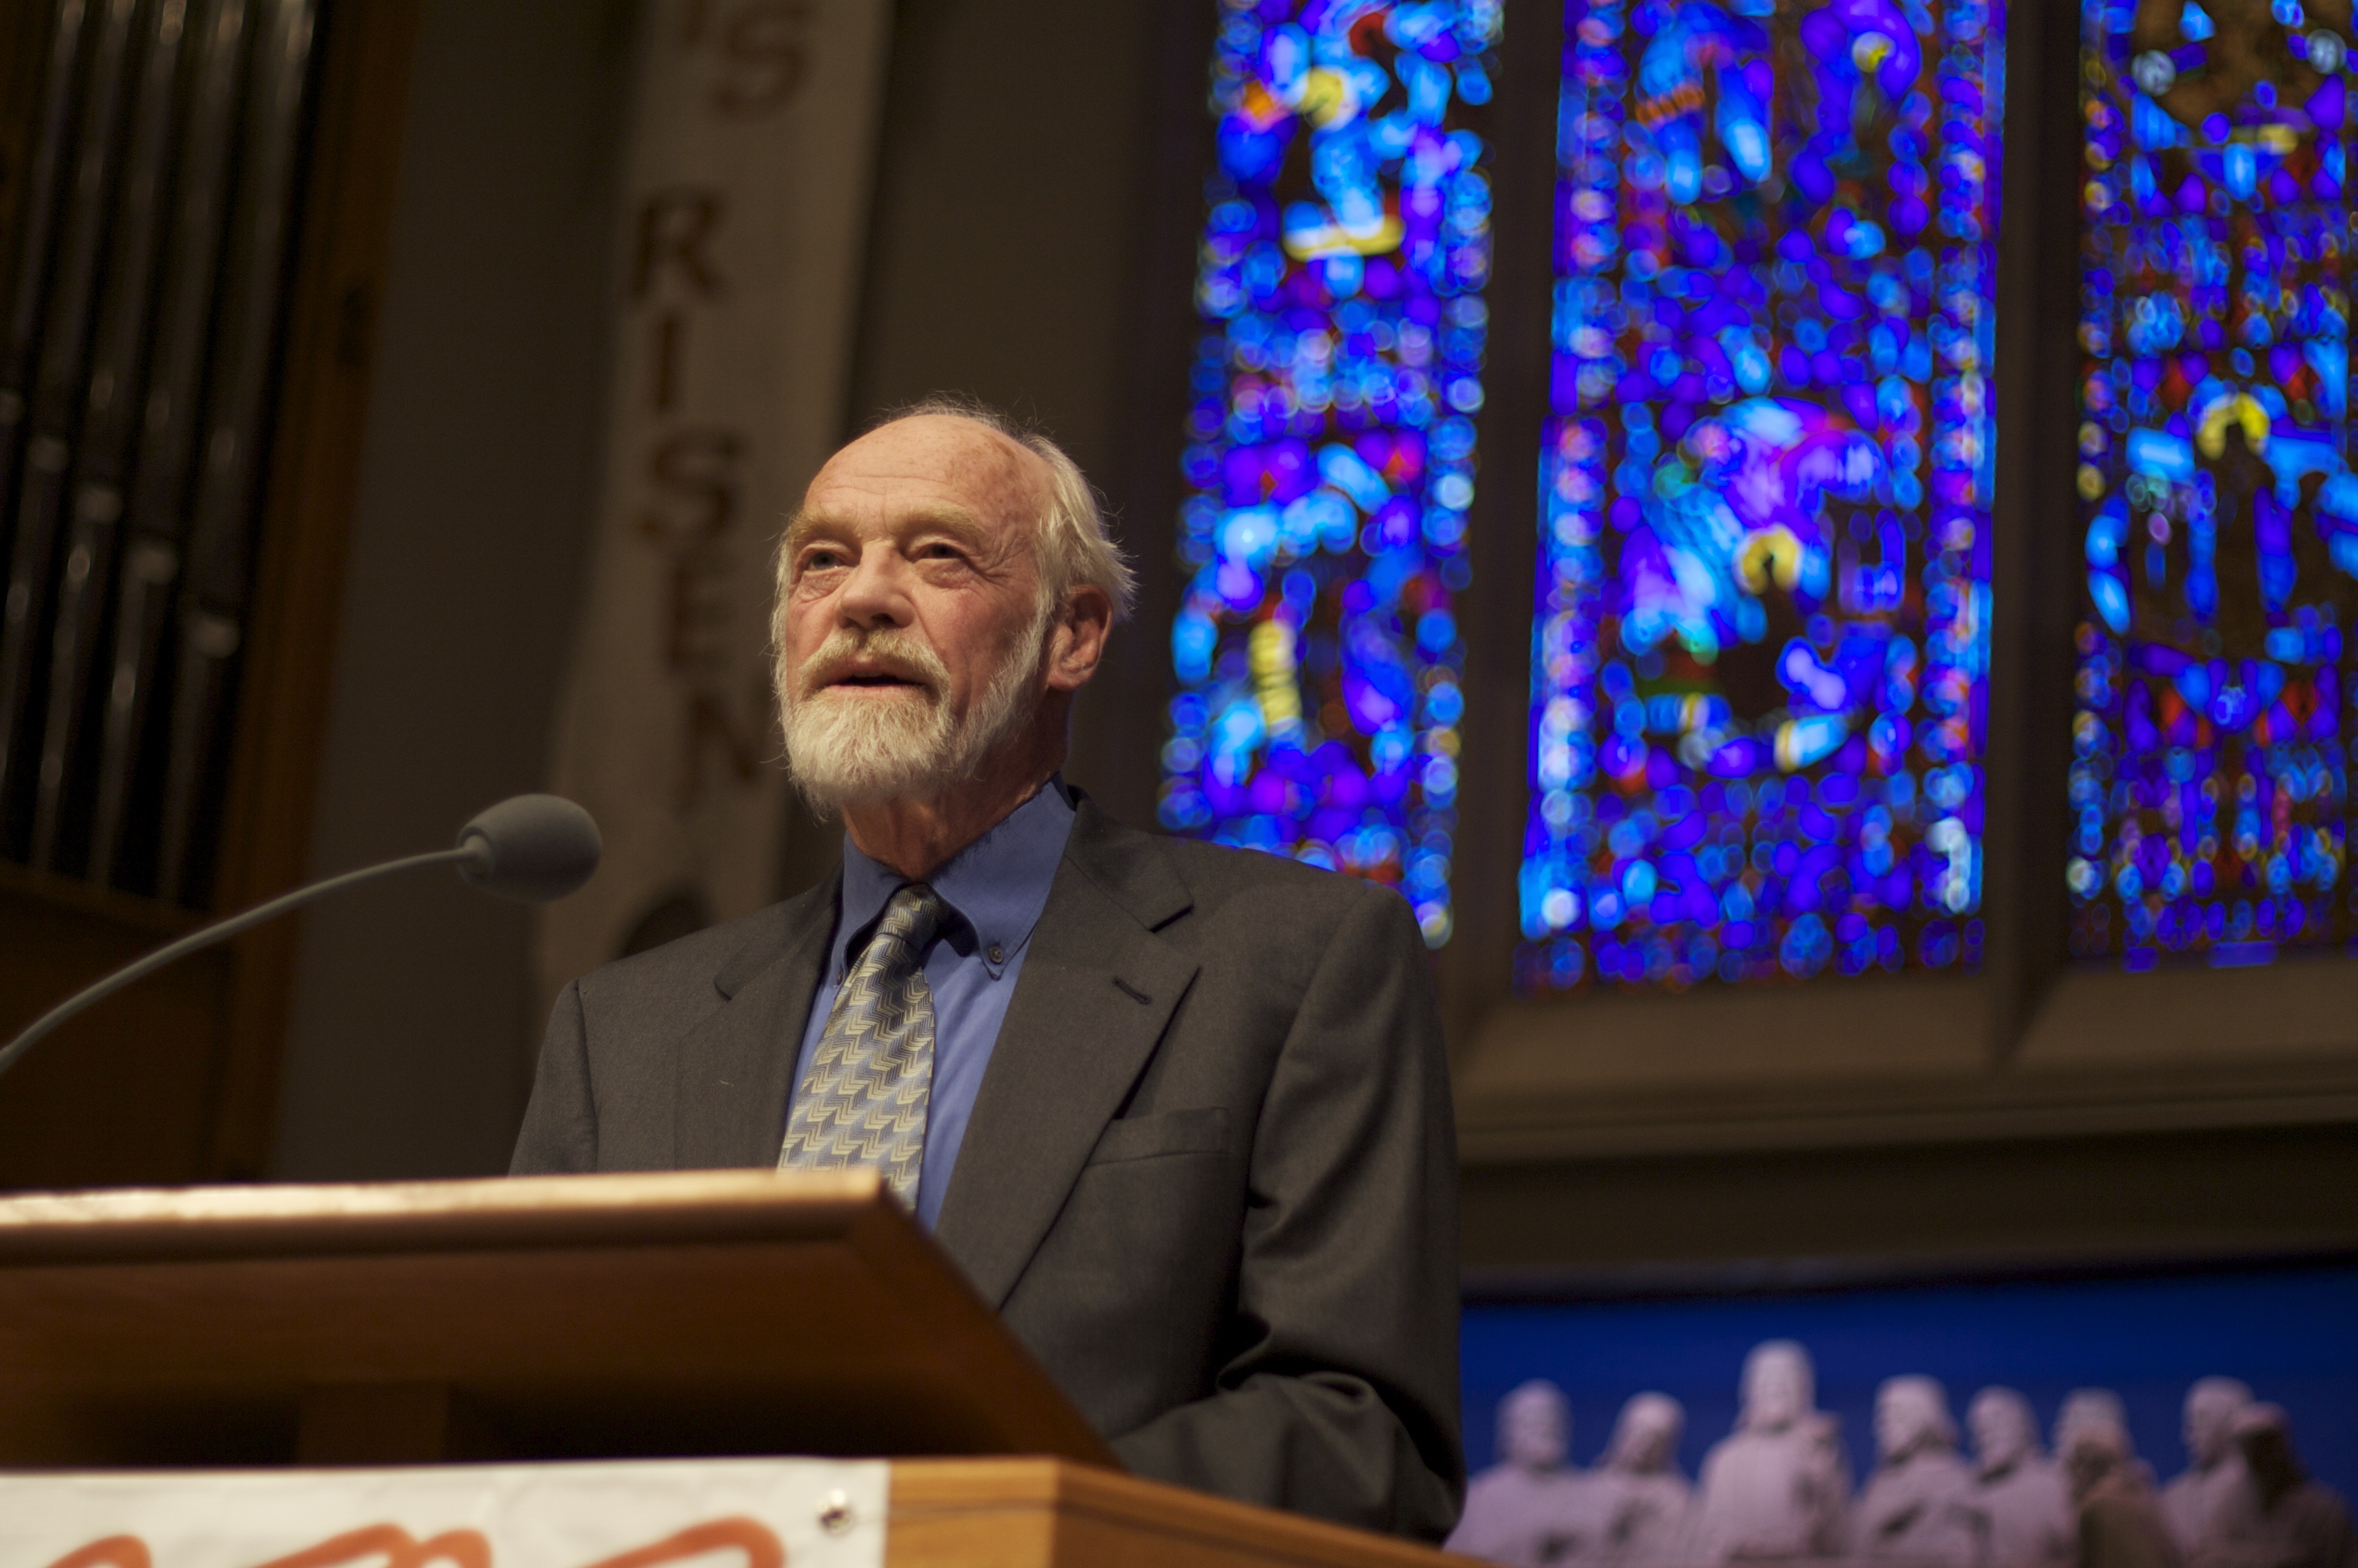 Eugene Peterson lecture at University Presbyterian Church in Seattle, Washington sponsored by the Seattle Pacific University Image Journal - by Clappstar, 16 May 2009 (Eugene_Peterson.jpg) (CC BY 3.0 [https://creativecommons.org/licenses/by/3.0/deed.en]), via Wikimedia Commons